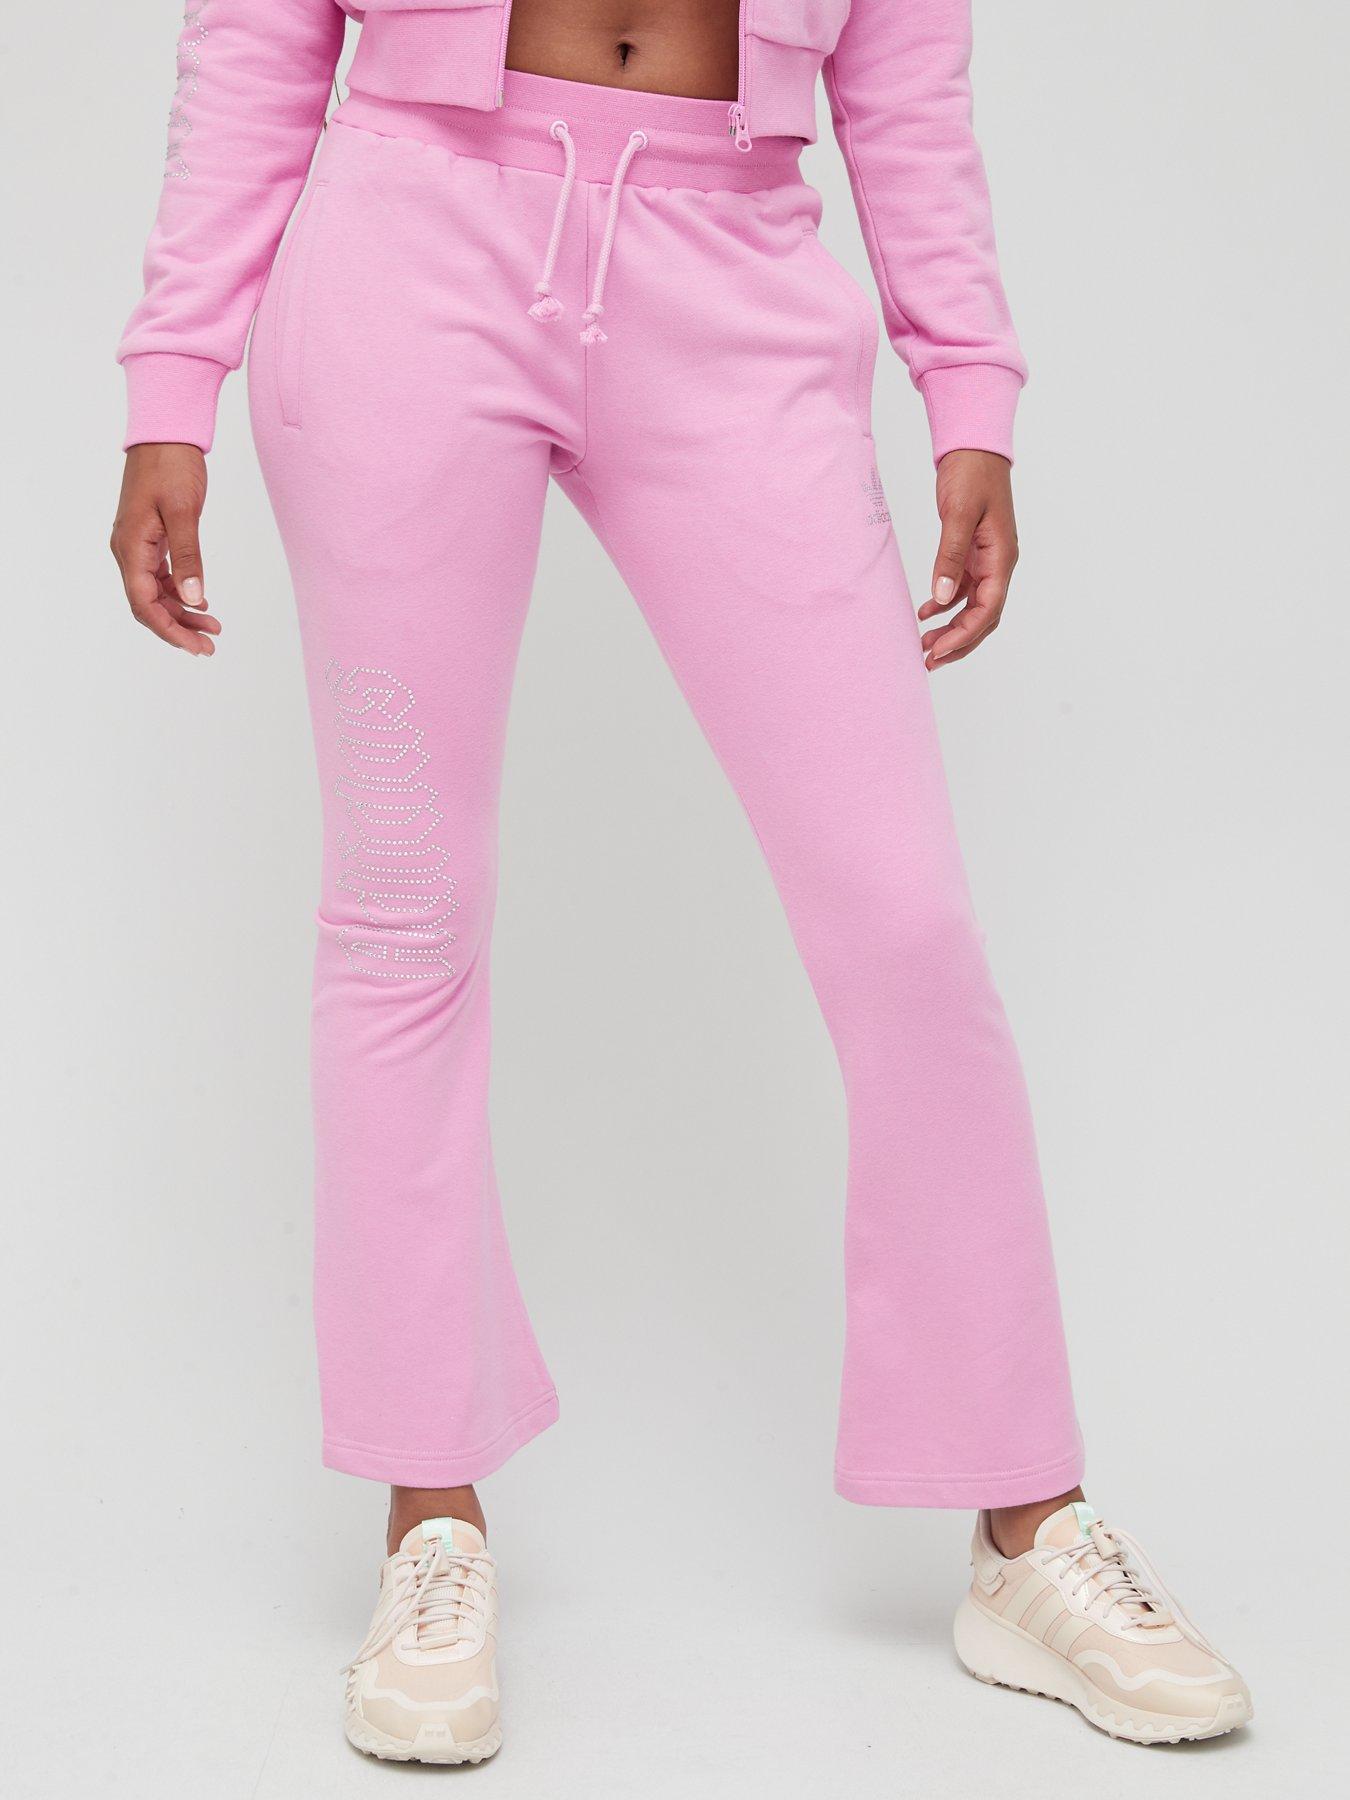  Early 2000s Cropped Track Pant - Pink